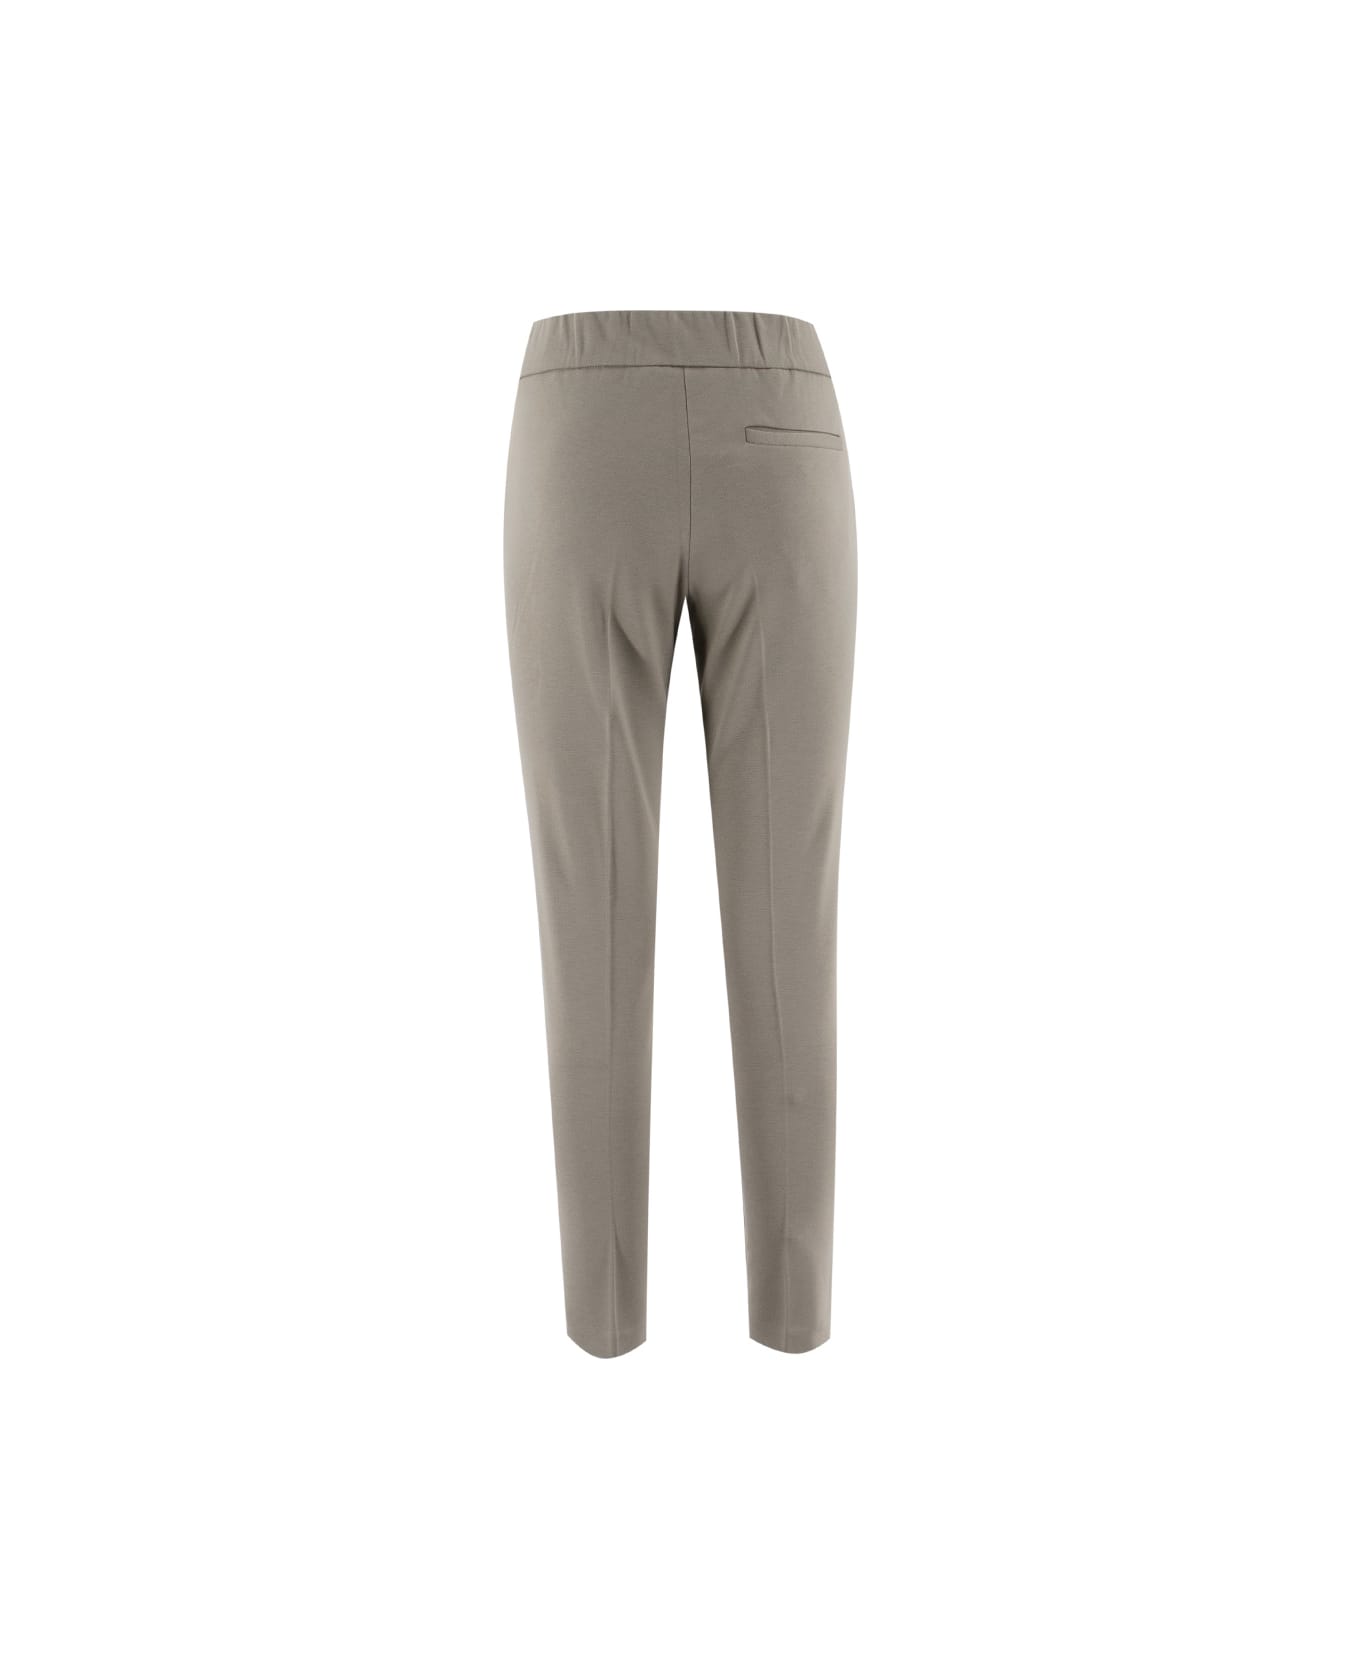 Le Tricot Perugia Trousers - MIDDLE GREY         